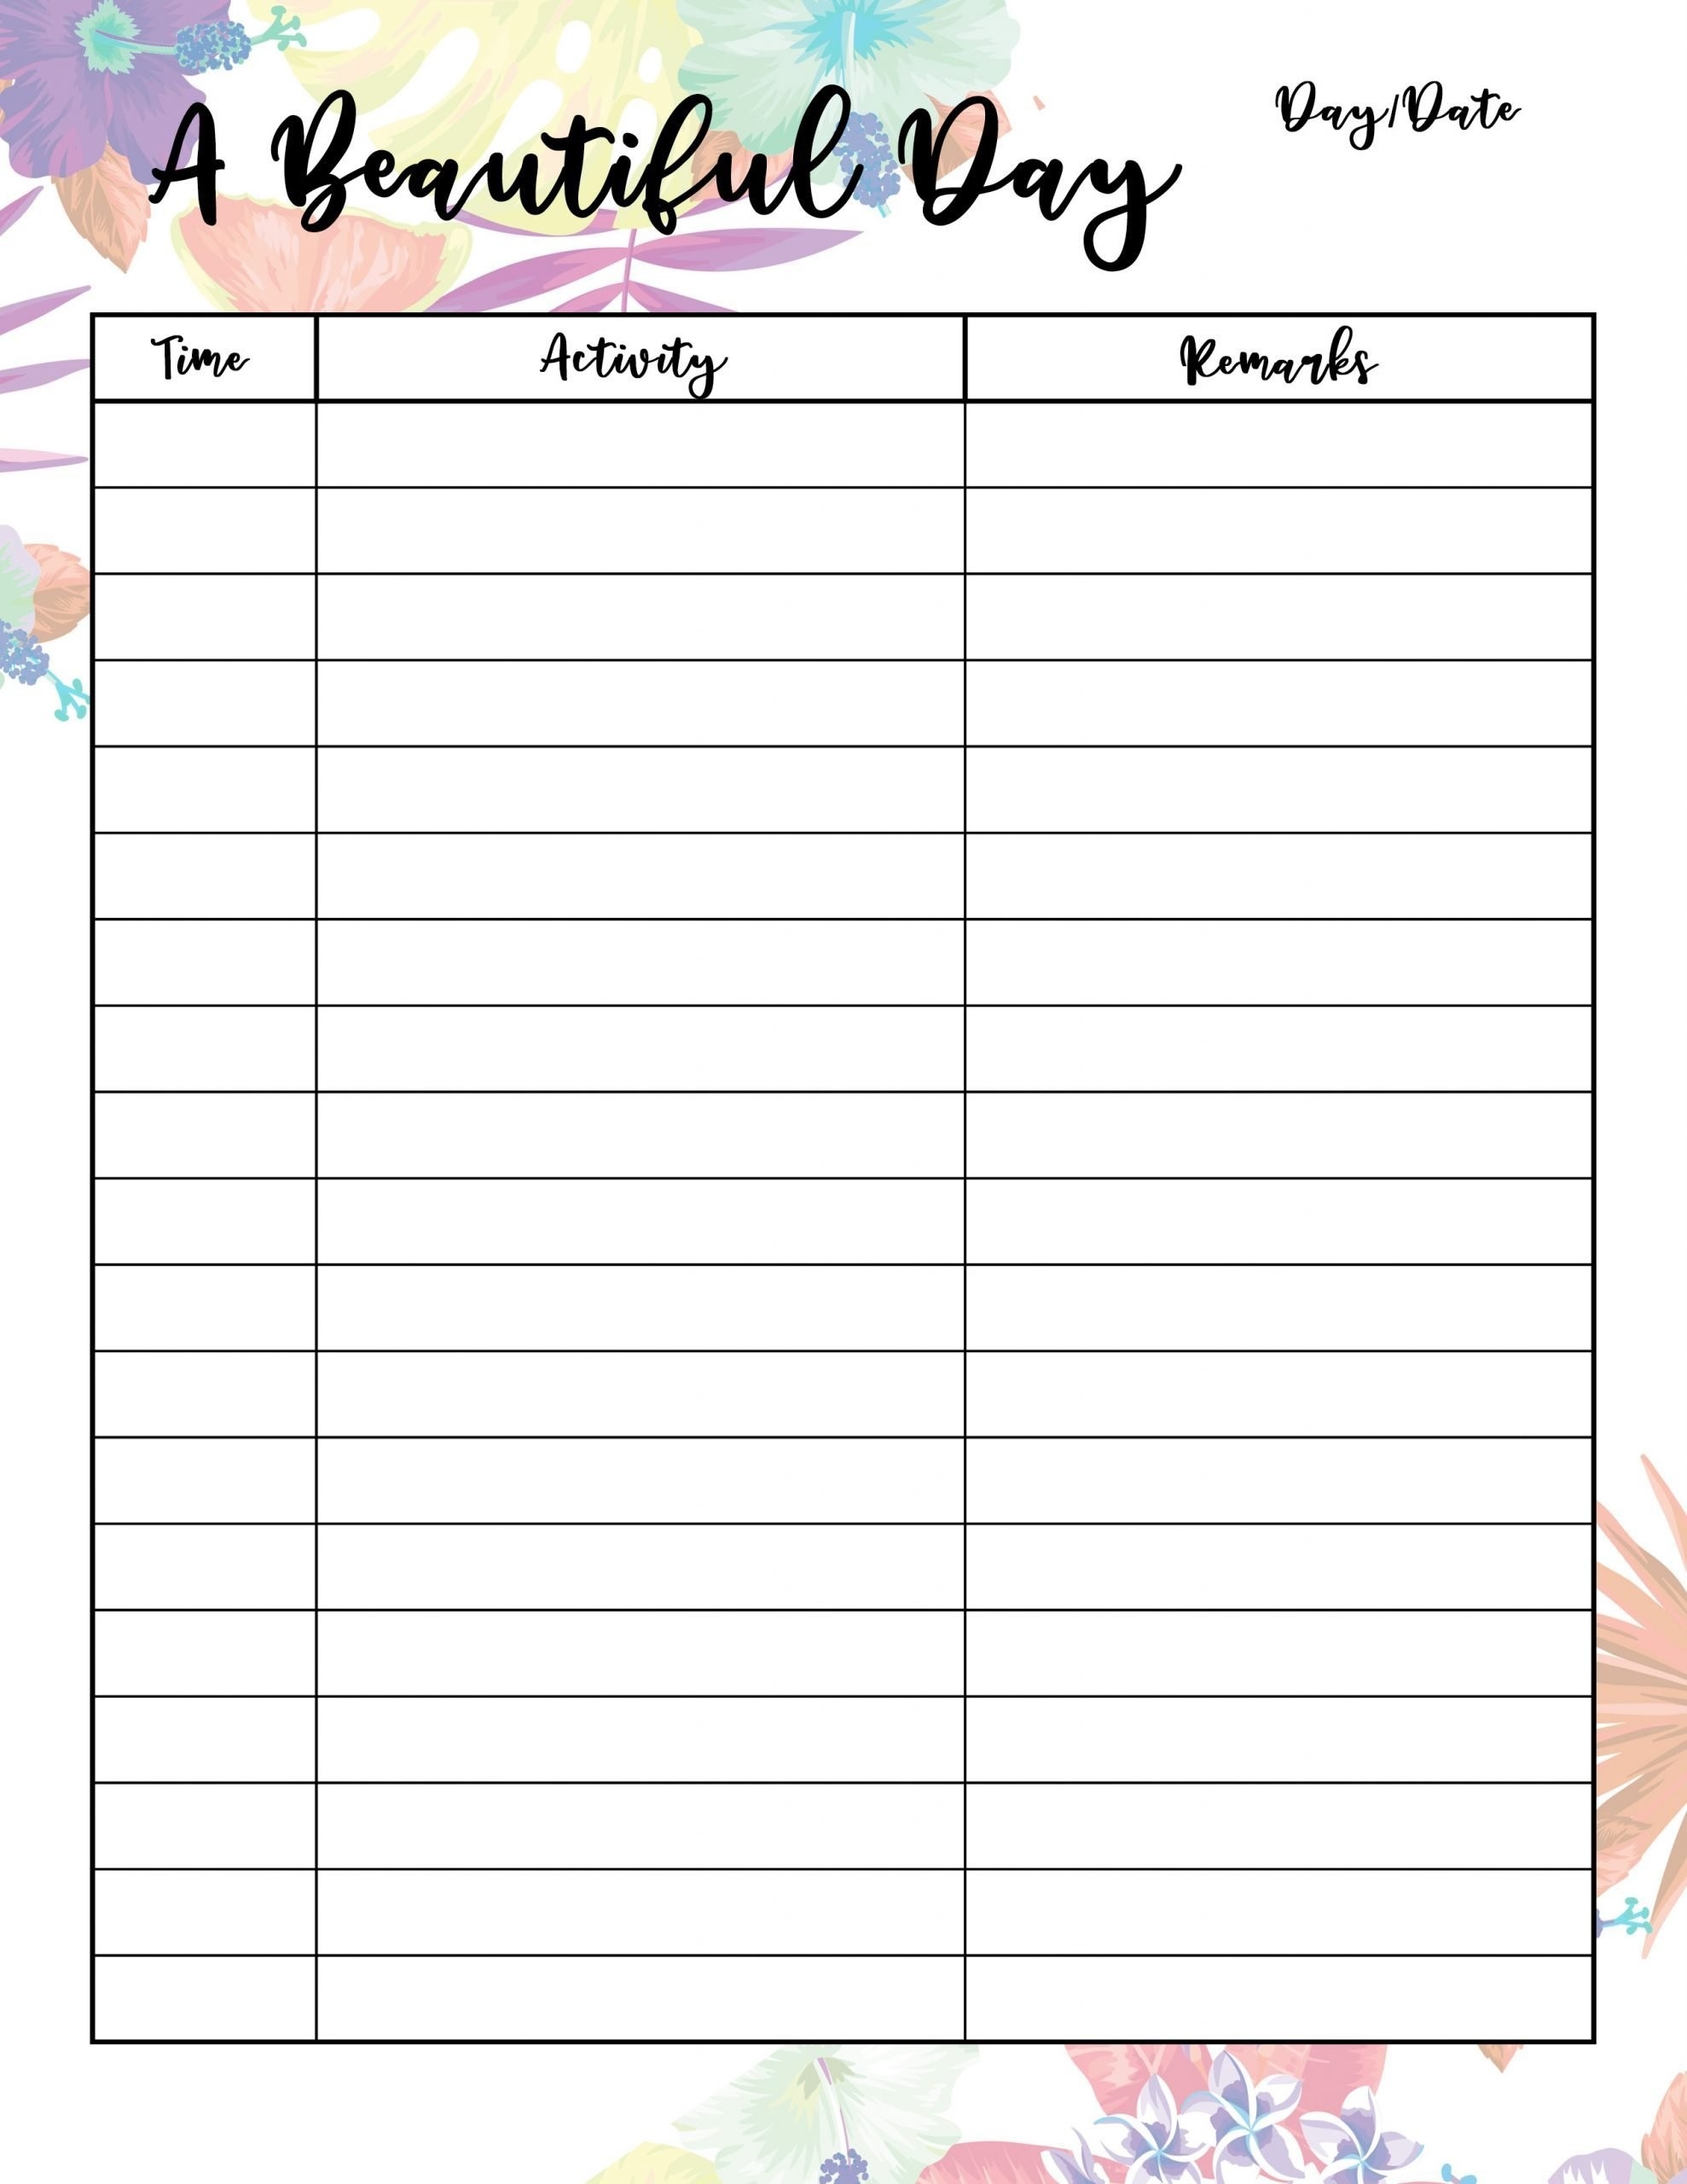 Printable Calendar 2021 With Daily Planners In Floral Prints-Fill In Calendar Printable 2021